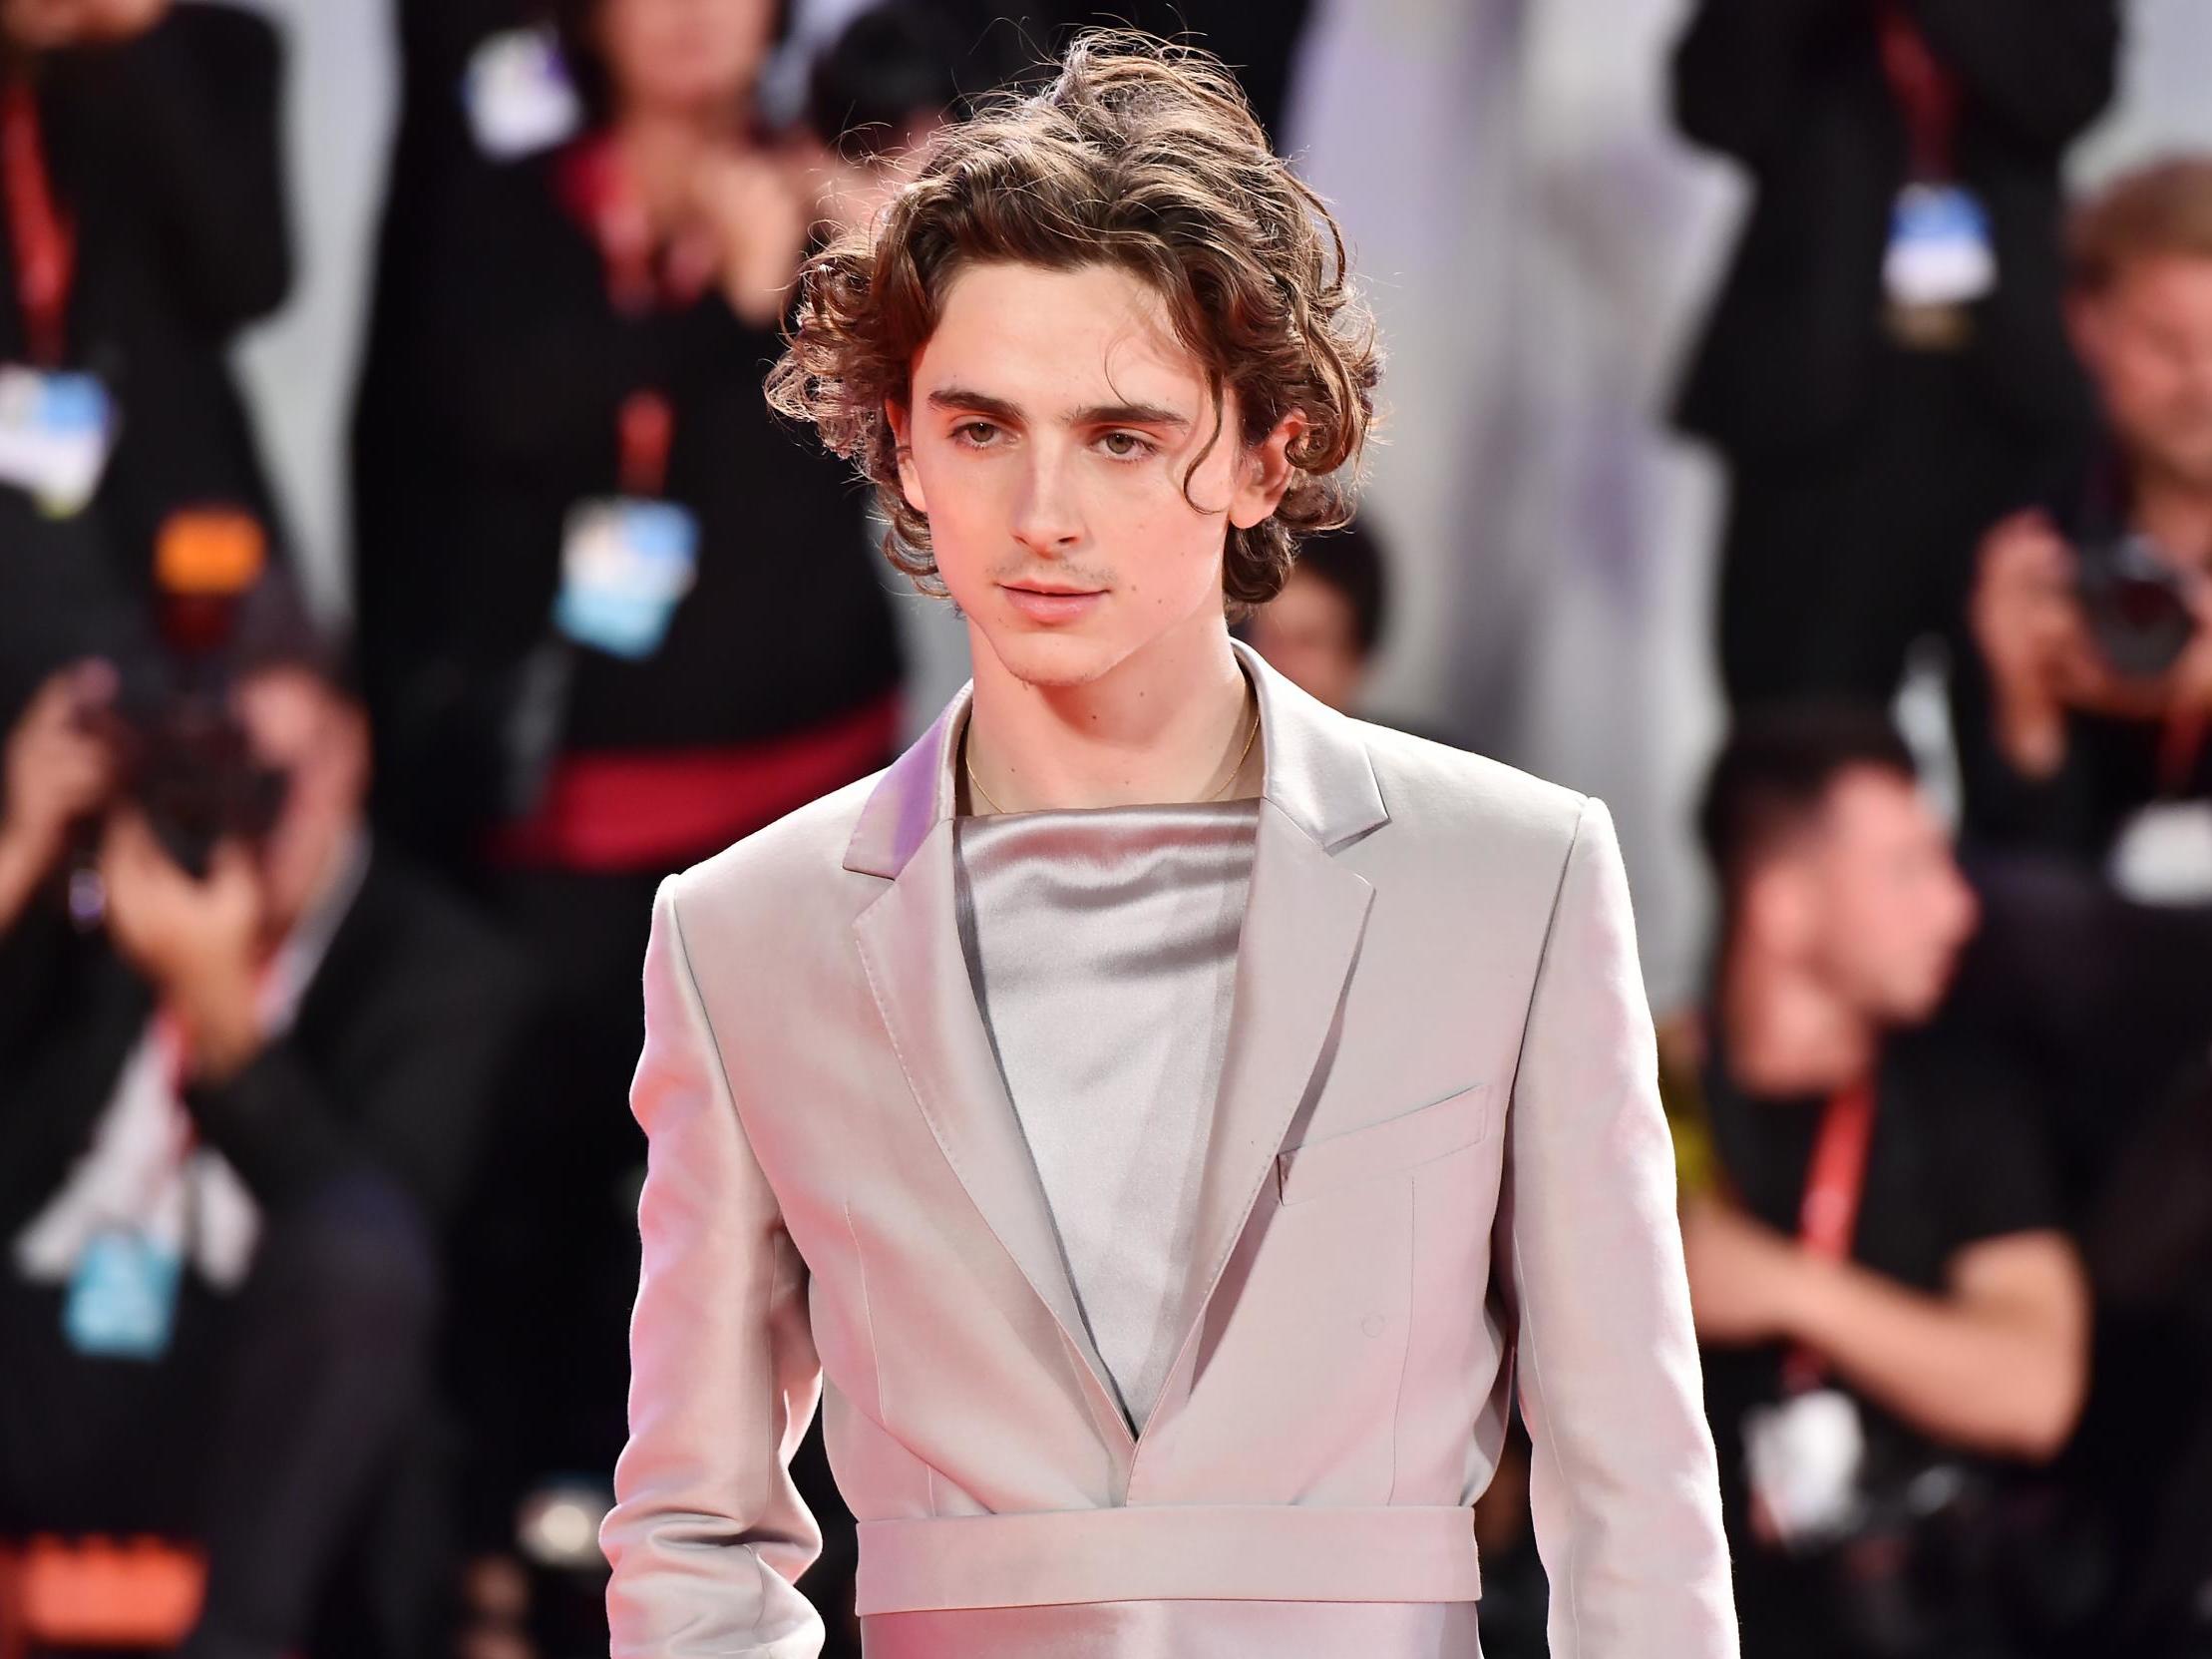 Timothee Chalamet: There's A New Male Dresser In Town